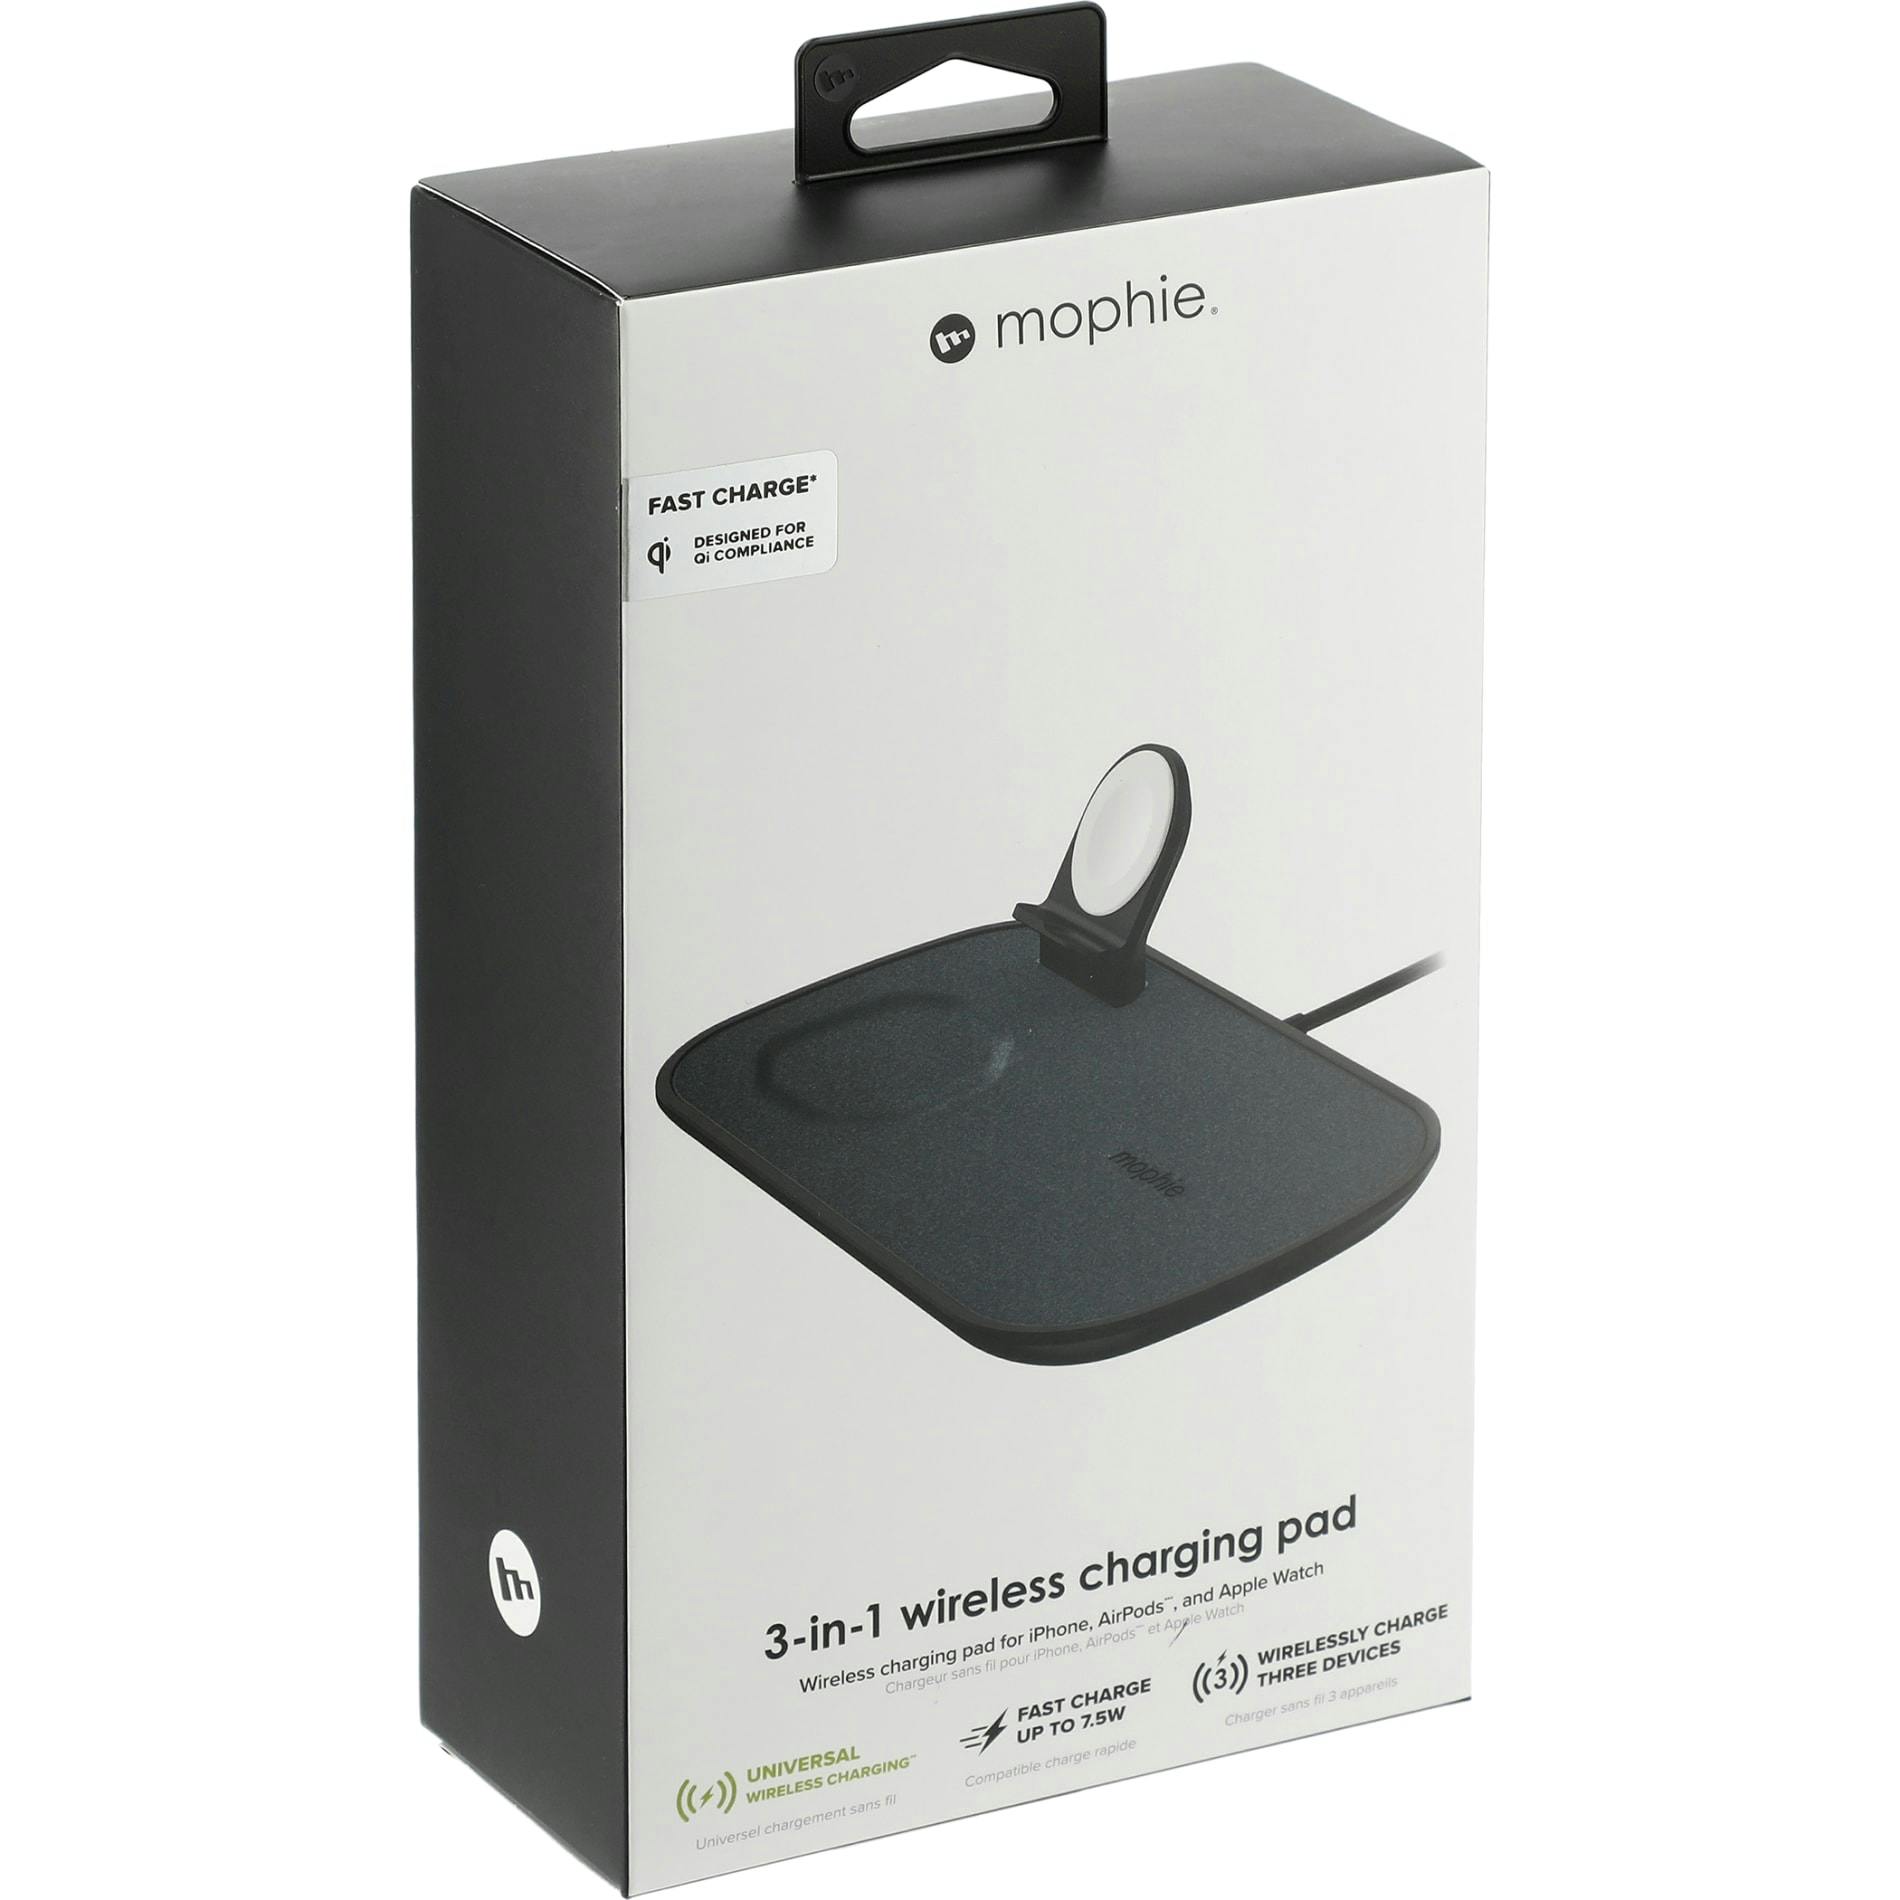 mophie® 3-in-1 Fabric Wireless Charging Pad - additional Image 3